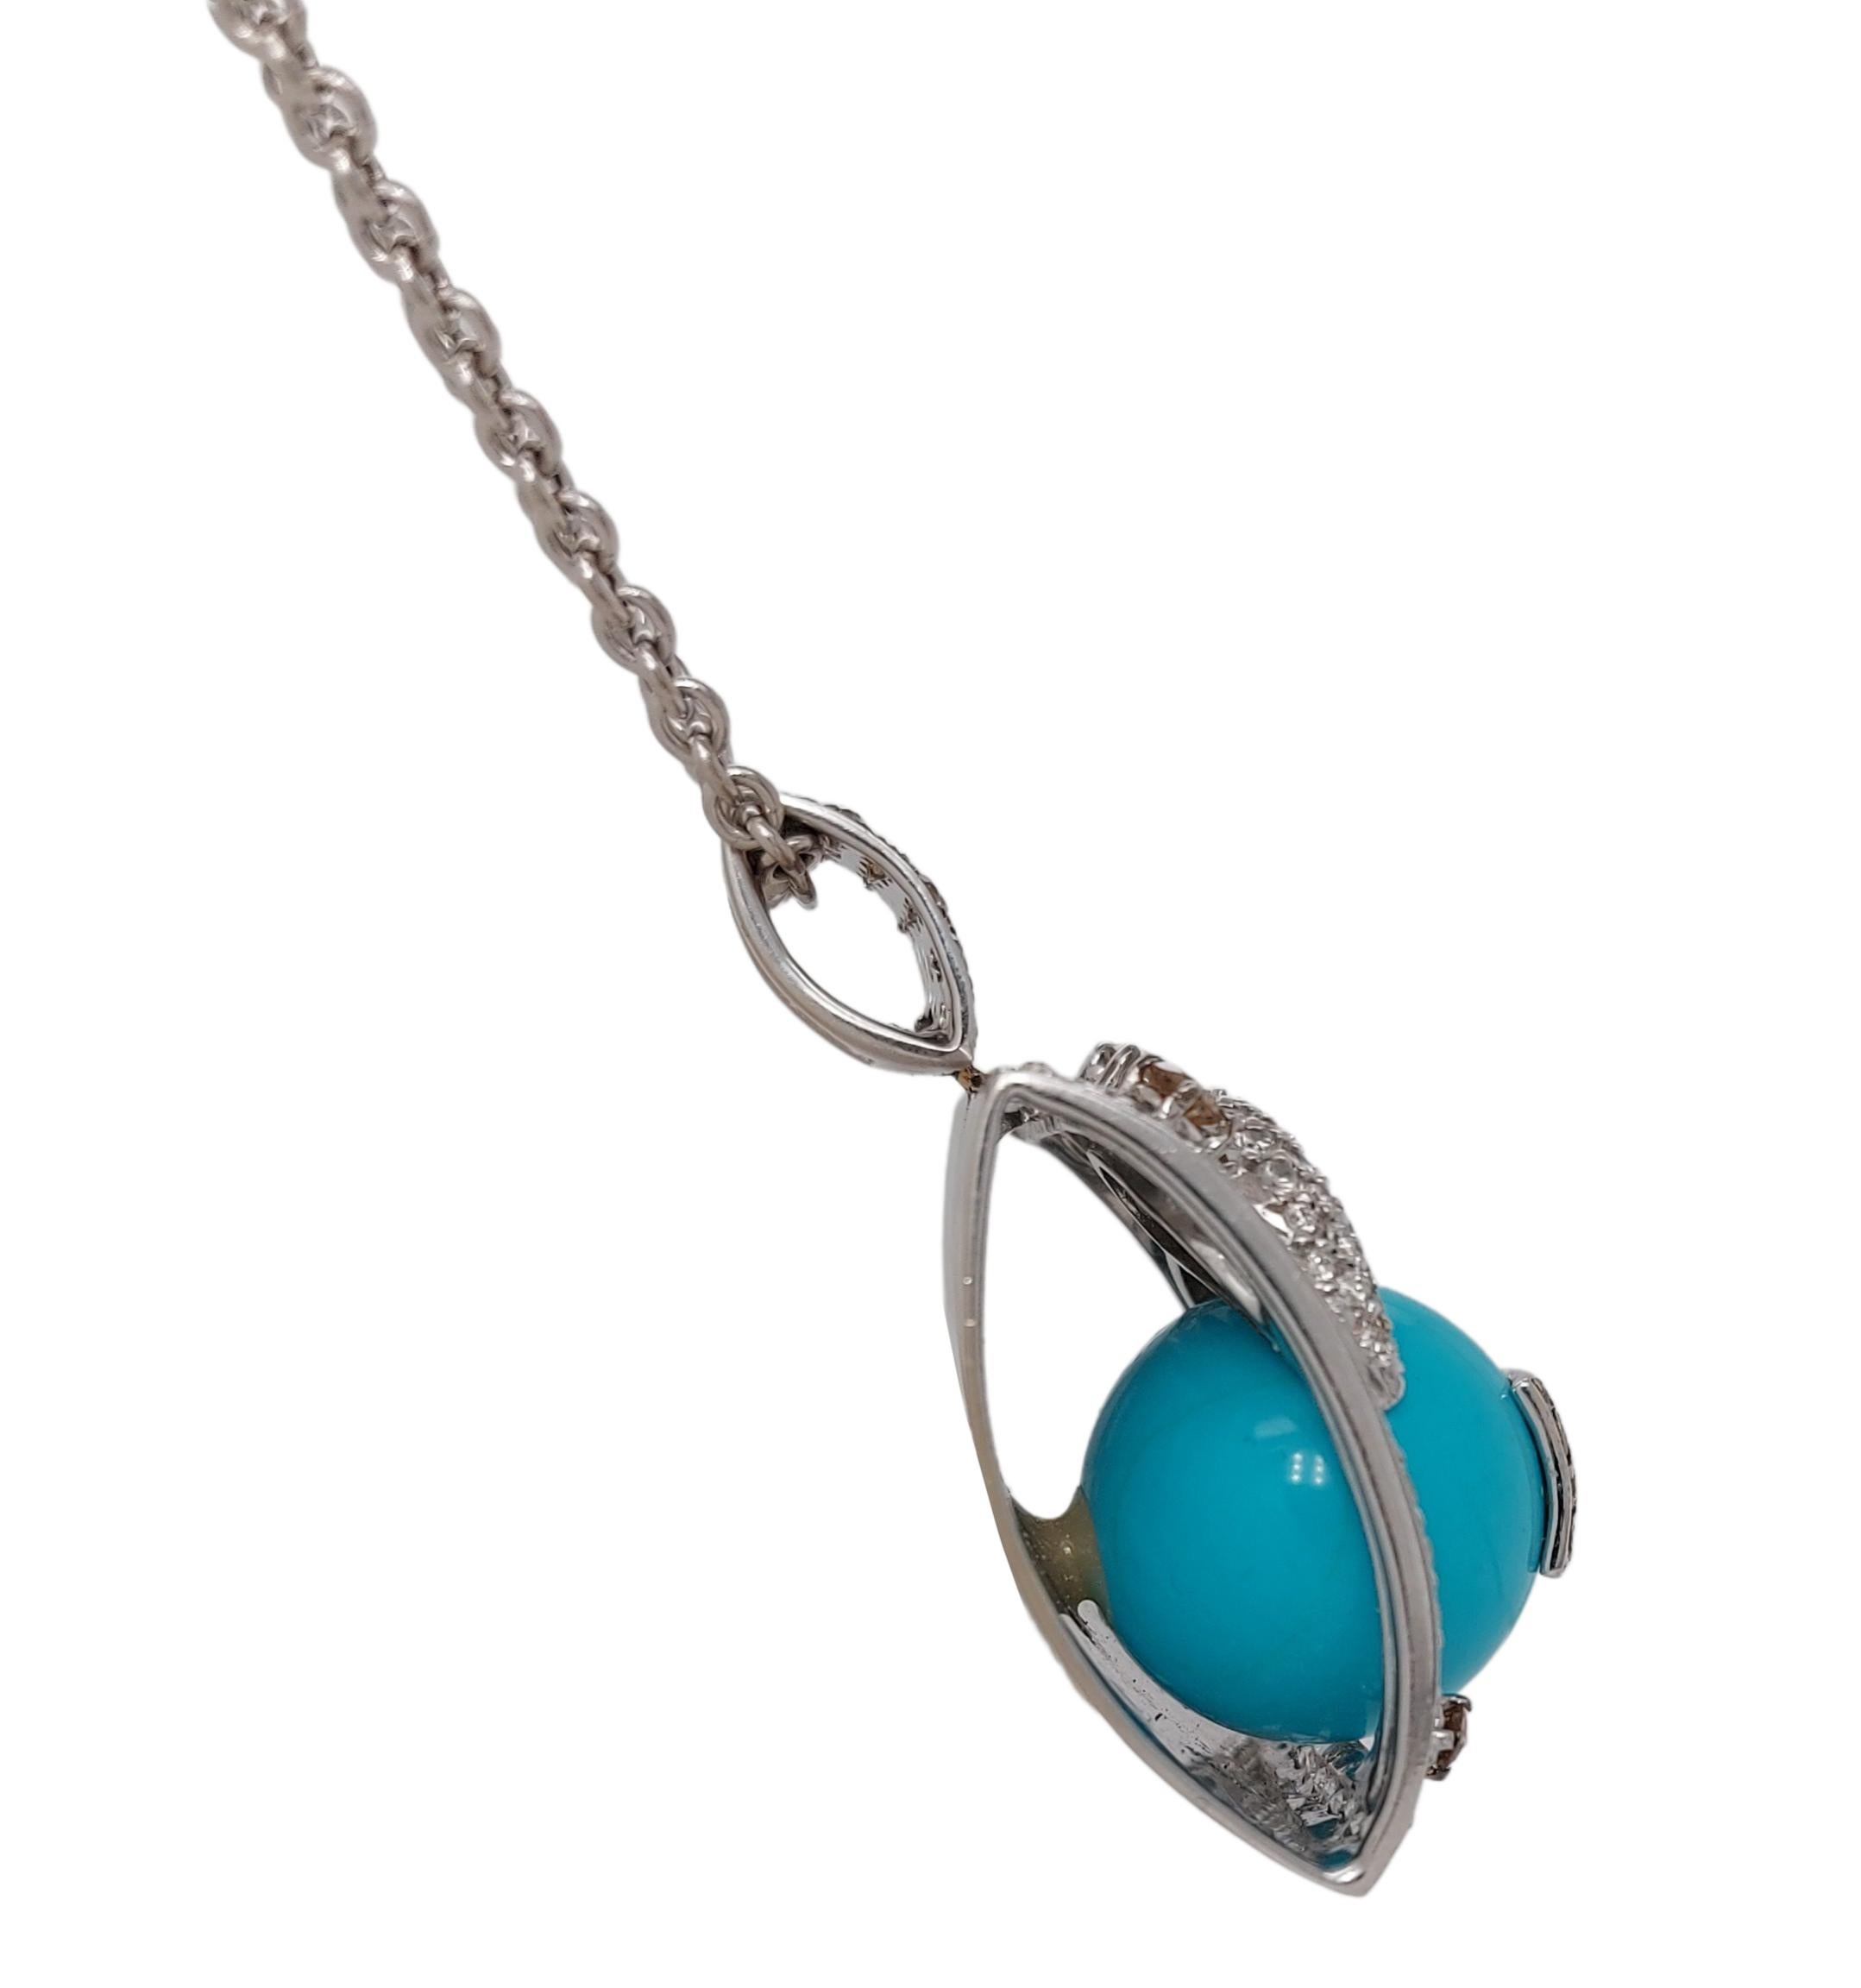 Stunning 18kt White Gold Pendant / Necklace with Turquoise and Diamonds 3